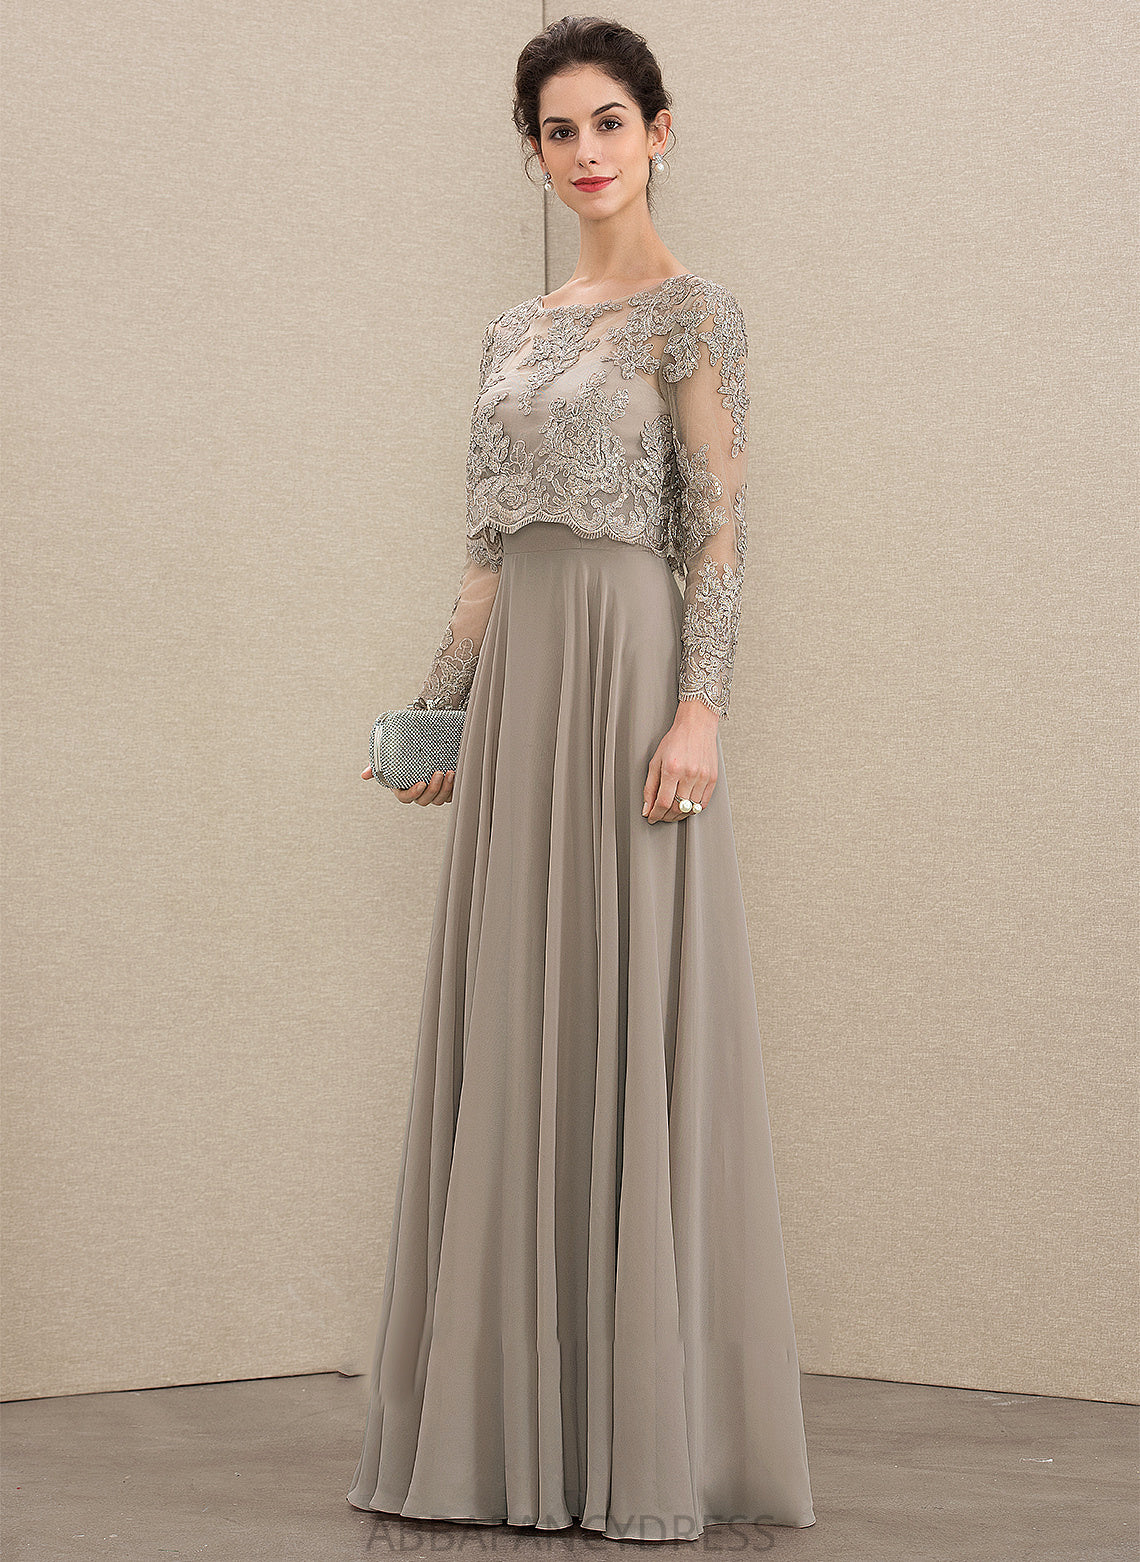 Scoop Chiffon Dress A-Line the Floor-Length Neck Mother of the Bride Dresses of Lace Itzel With Mother Sequins Bride